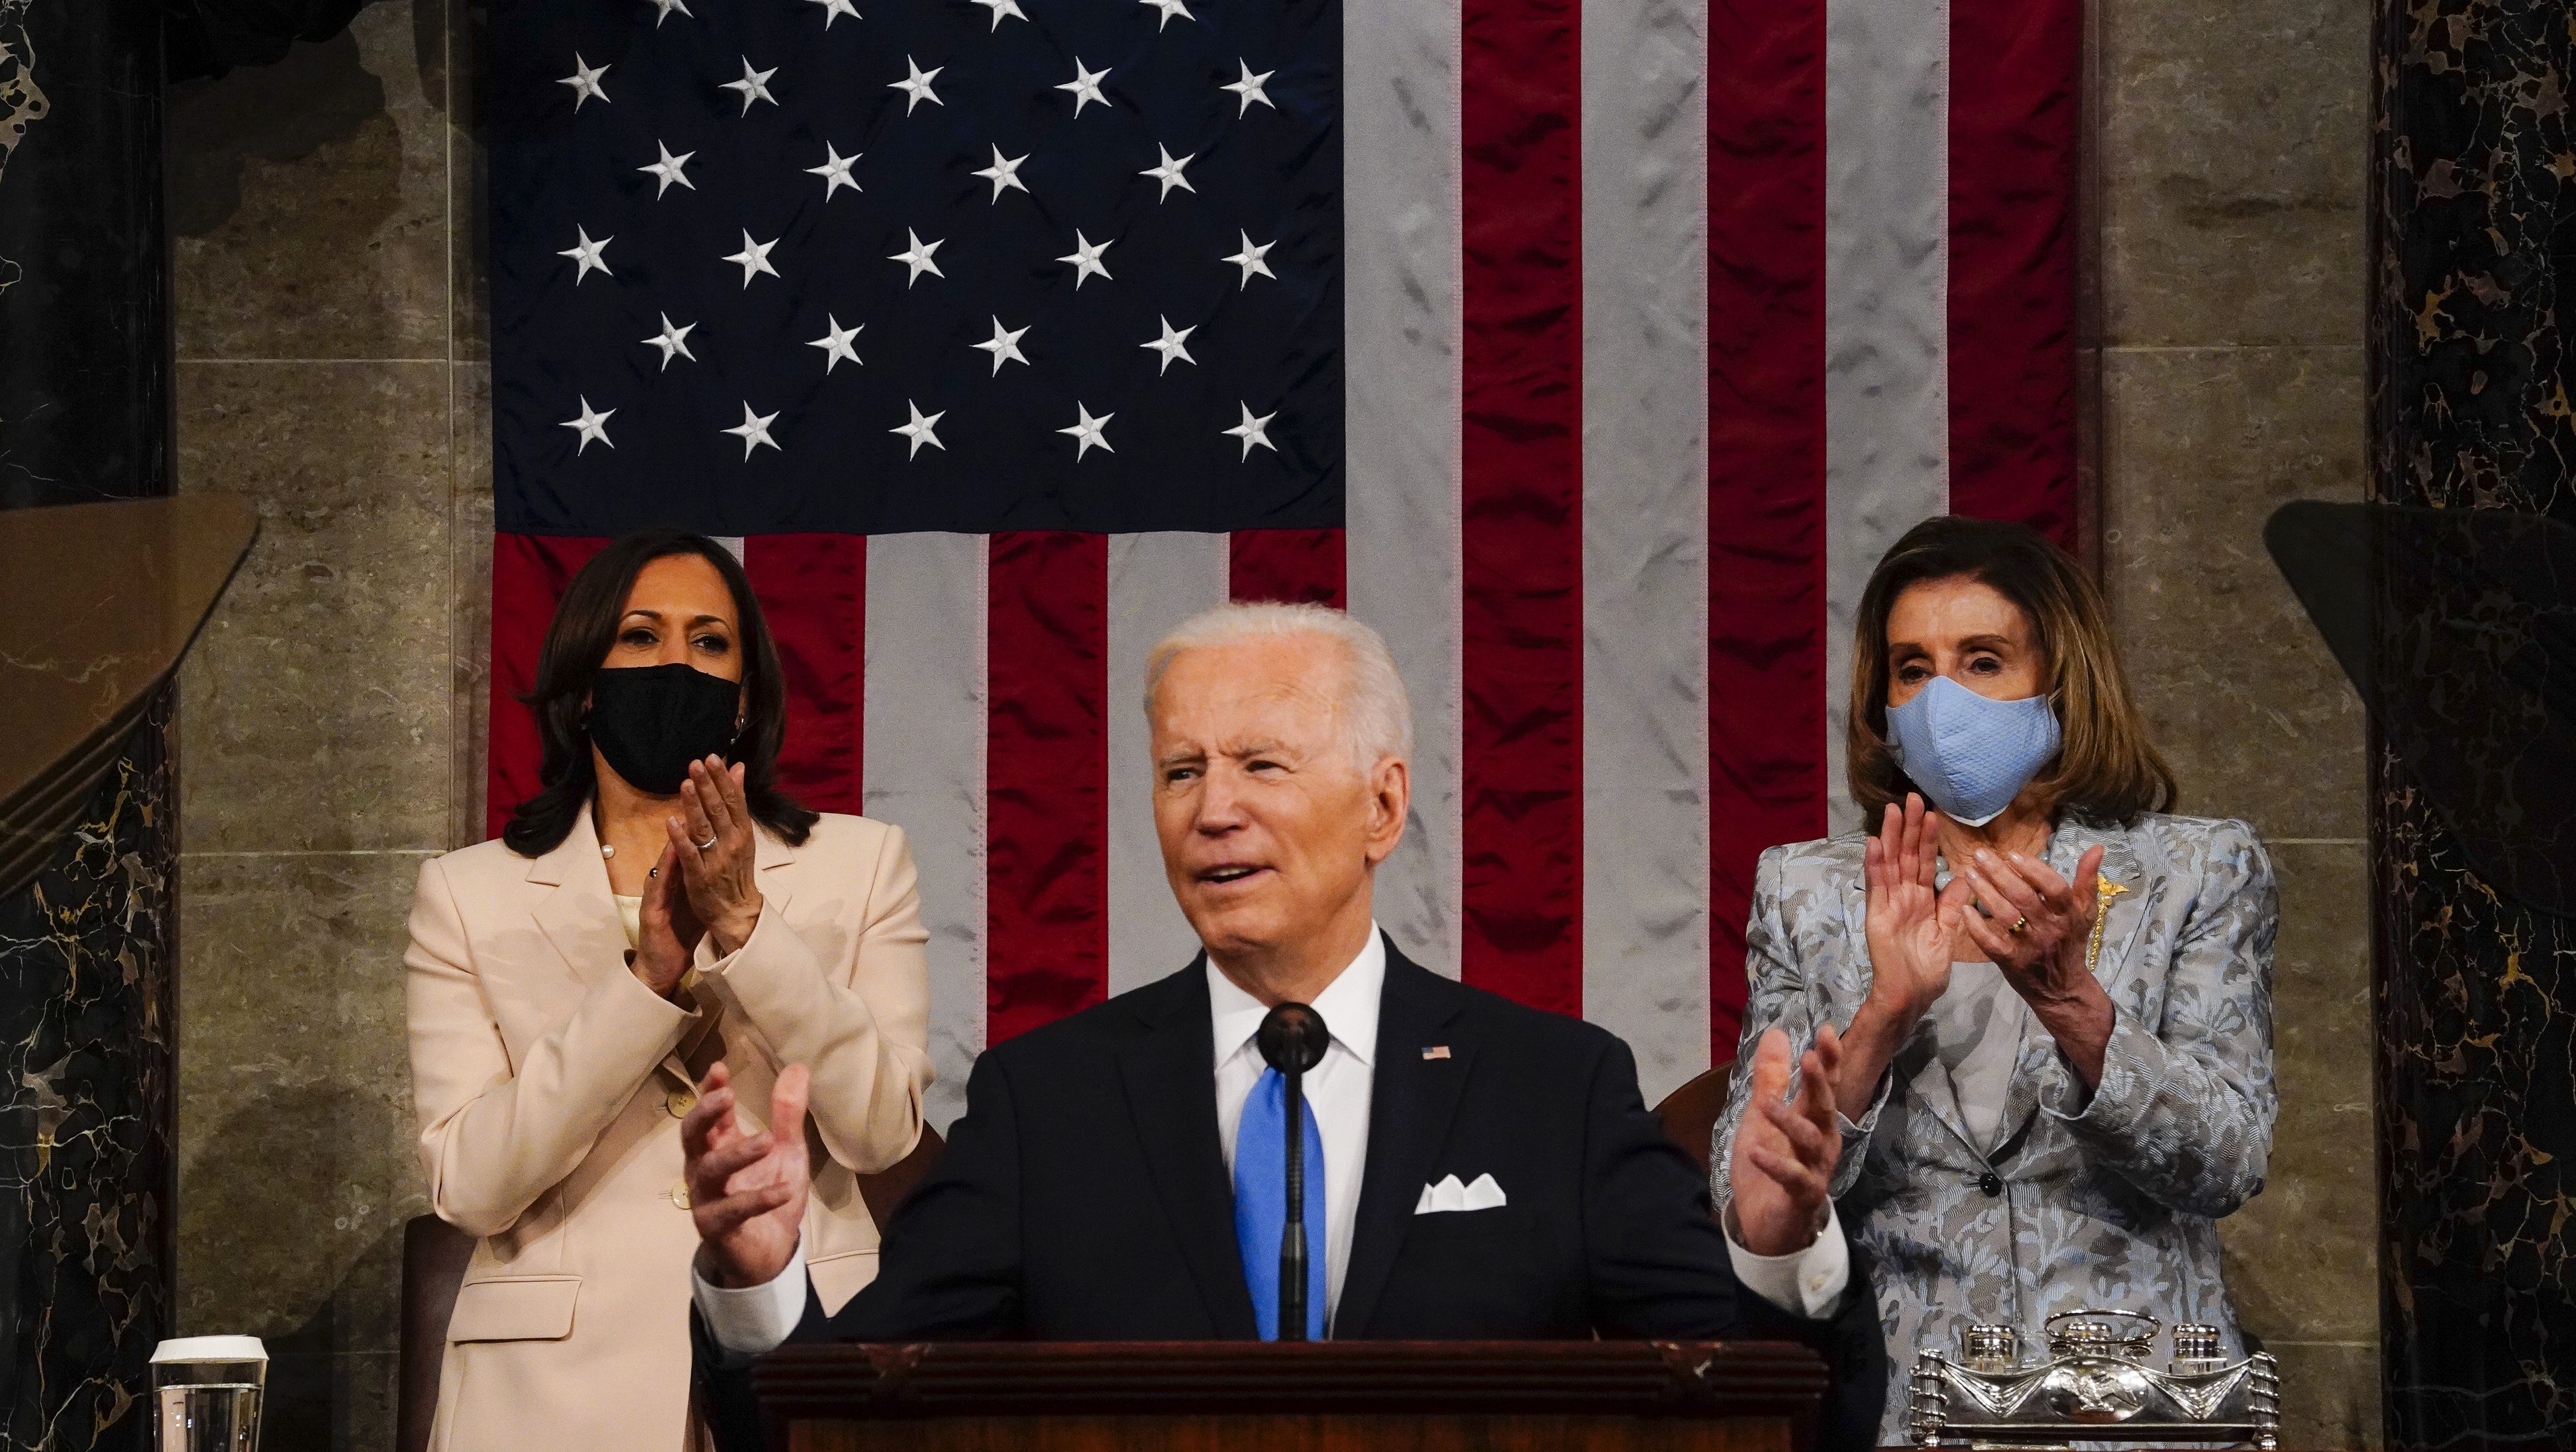 President Joe Biden, center, speaks during a joint session of Congress at the U.S. Capitol in Washington, D.C., April 28, 2021.